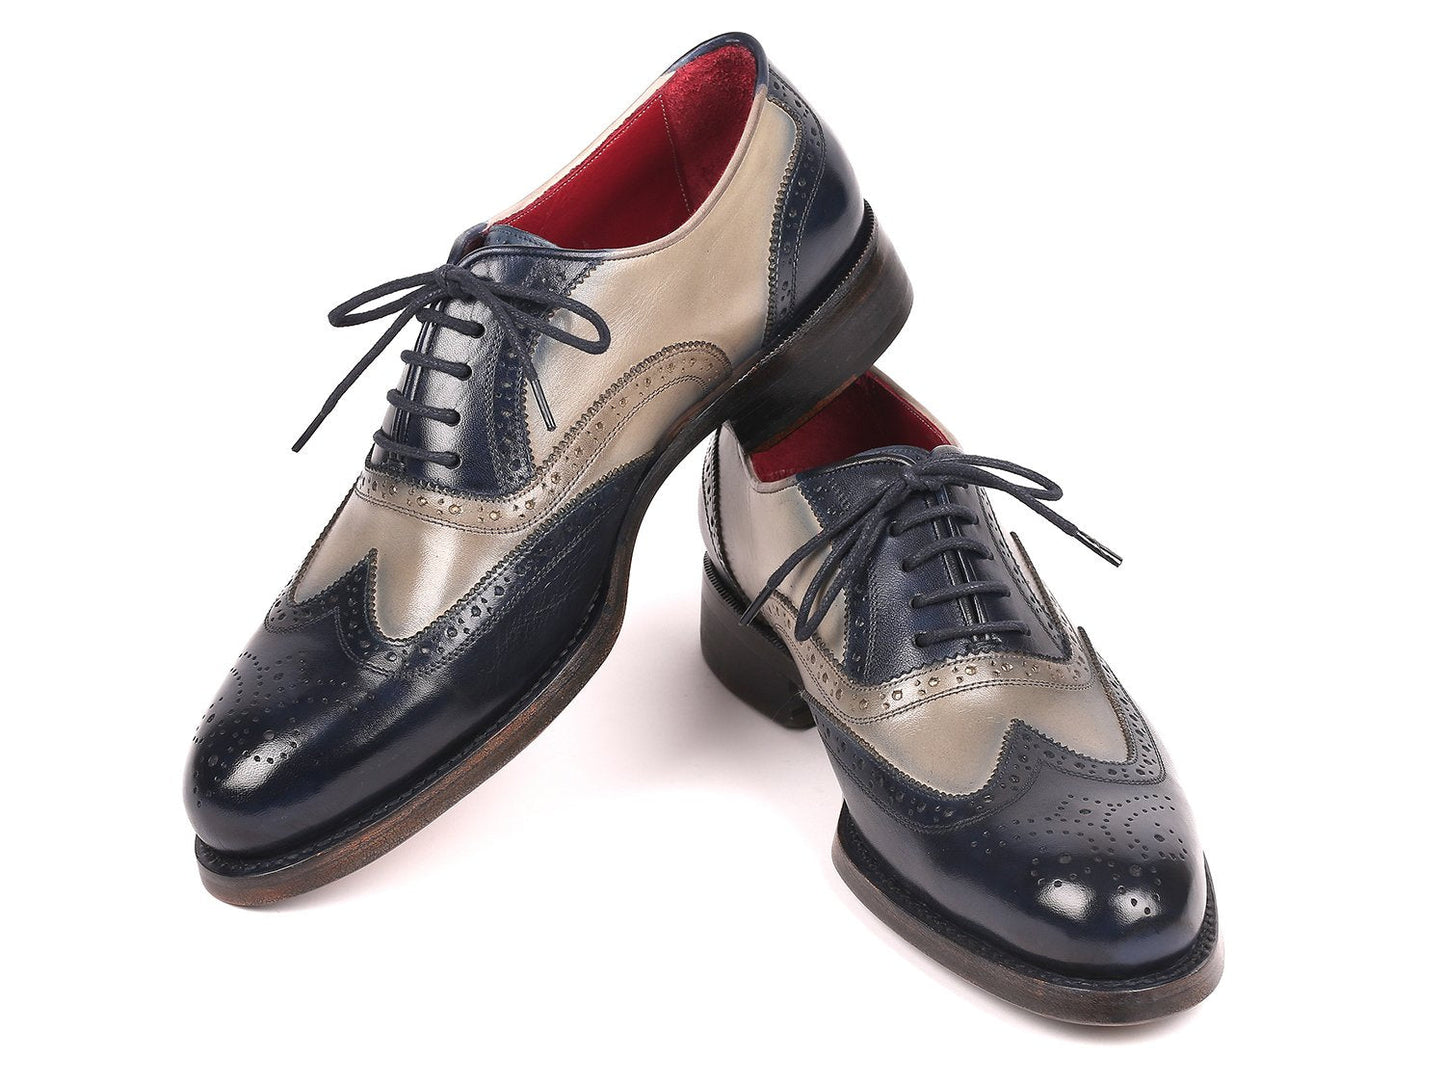 Paul Parkman Navy & Gray Wingtip Oxfords Goodyear Welted (ID#027-NVYGRY)